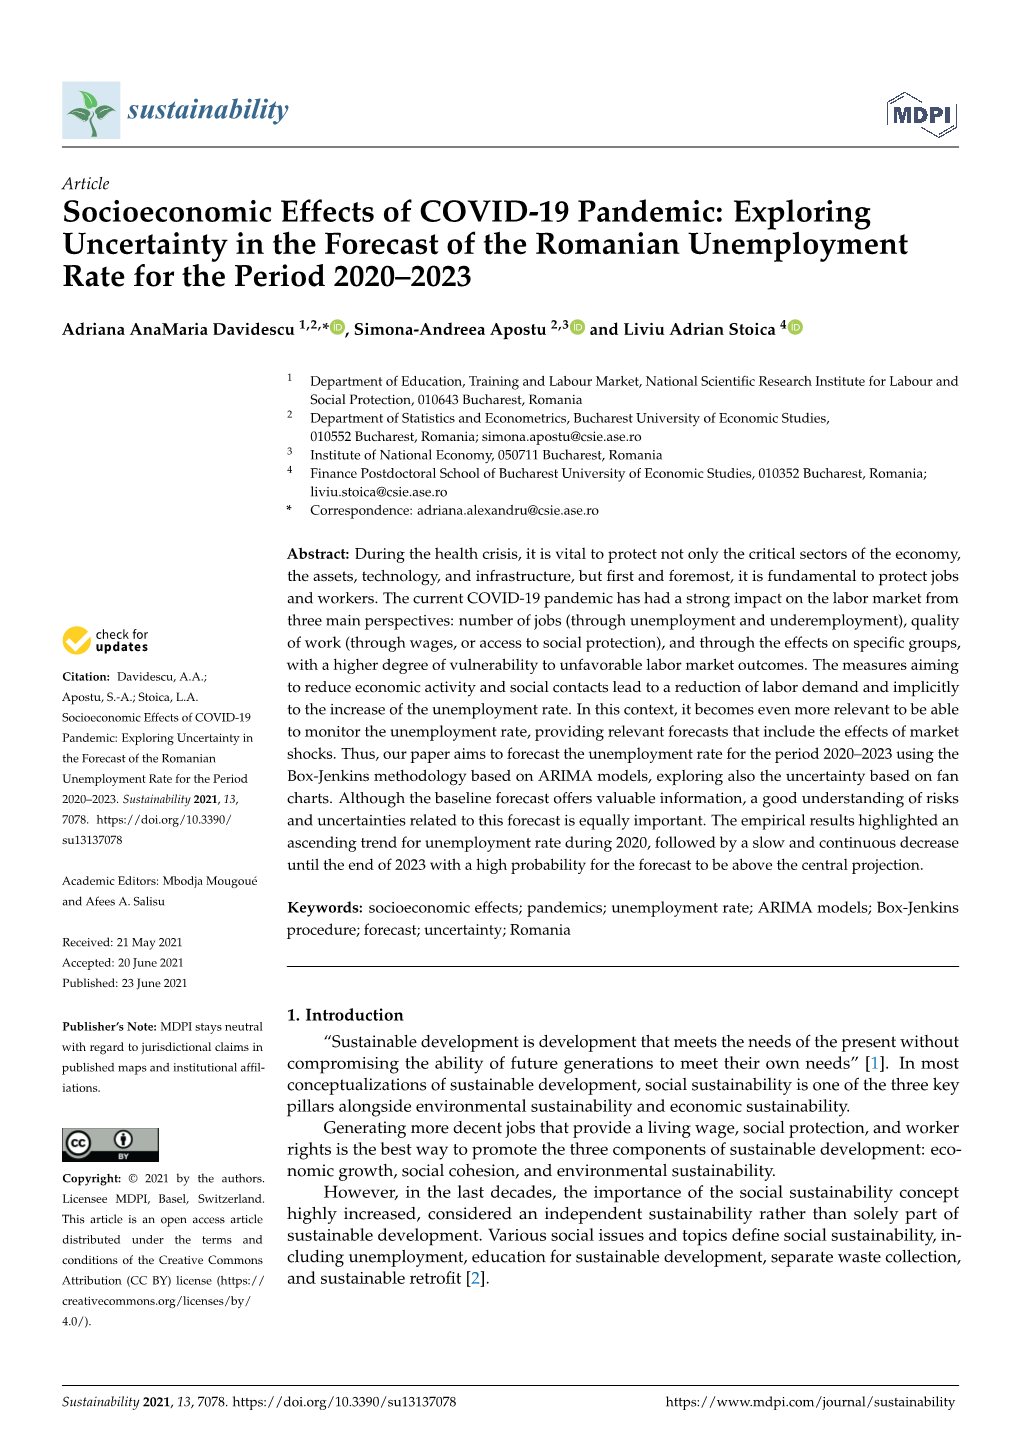 Socioeconomic Effects of COVID-19 Pandemic: Exploring Uncertainty in the Forecast of the Romanian Unemployment Rate for the Period 2020–2023